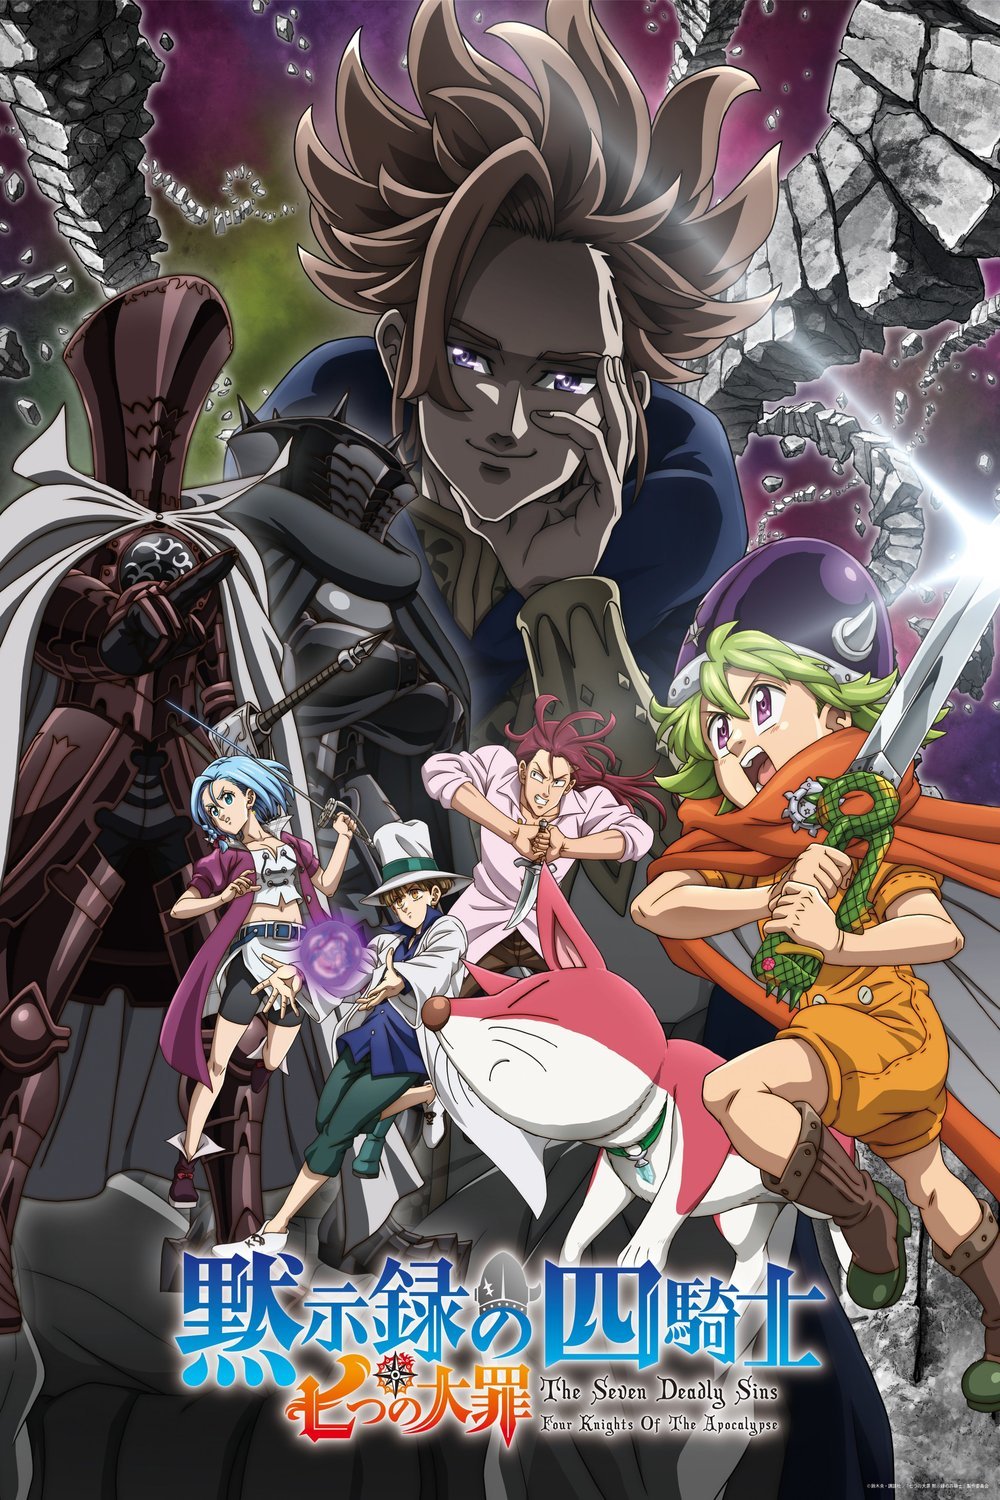 Japanese poster of the movie The Seven Deadly Sins: Four Knights of the Apocalypse